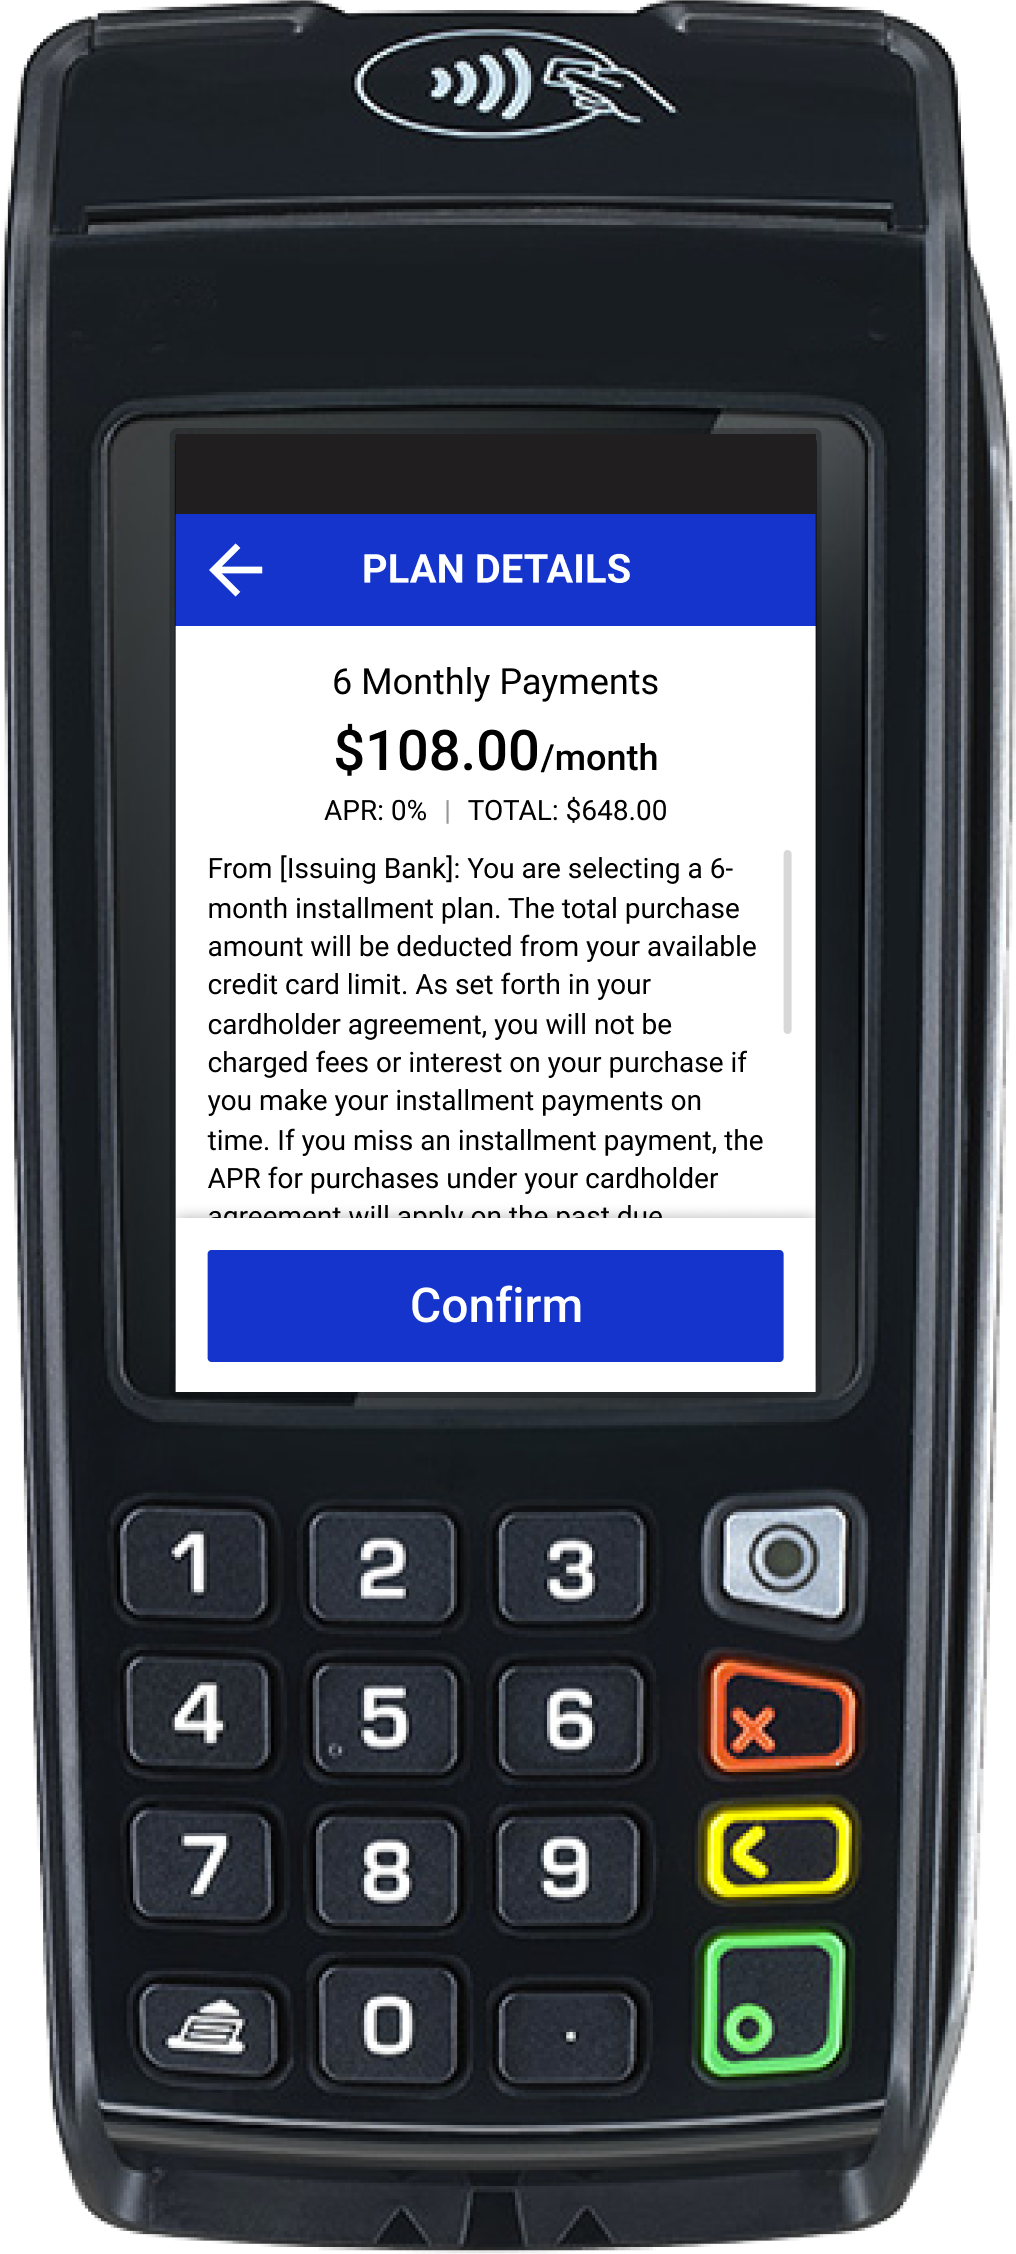 United Kingdom portrait style payment terminal, review terms and conditions